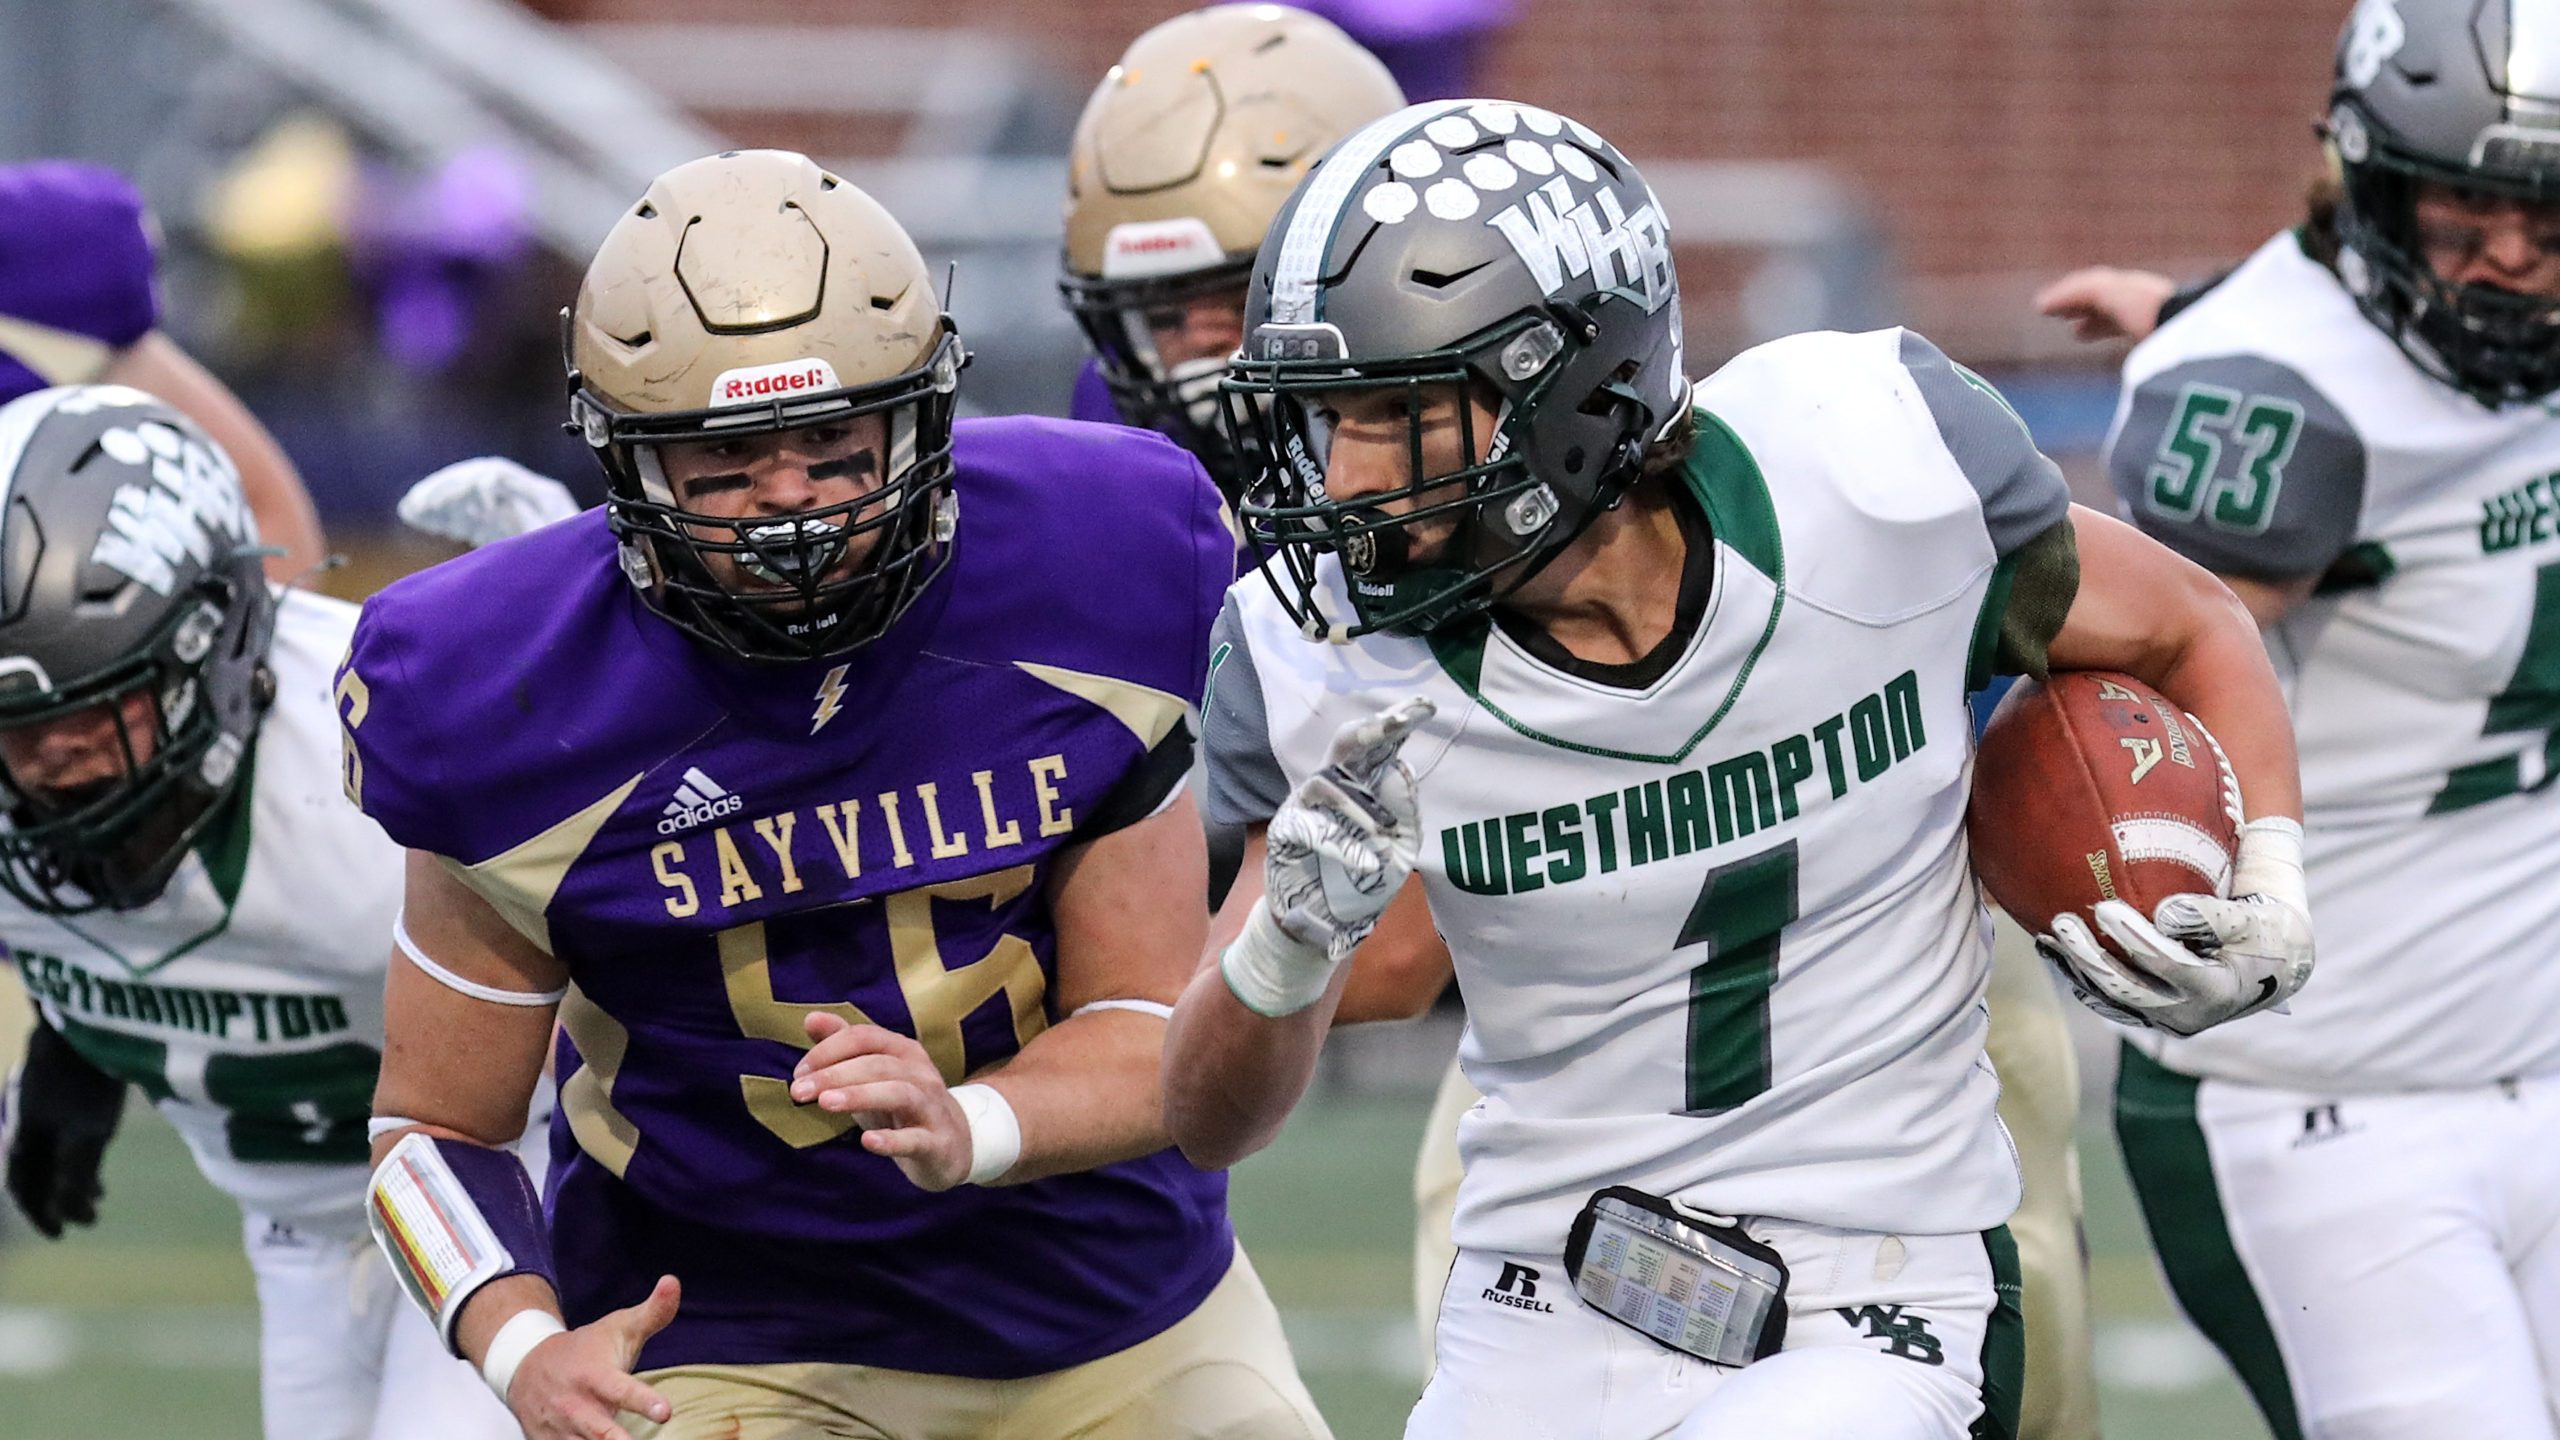 Westhampton Beach running back Deegan Laube finished with 37 yards on 13 carries and had an 81-yard touchdown reception.